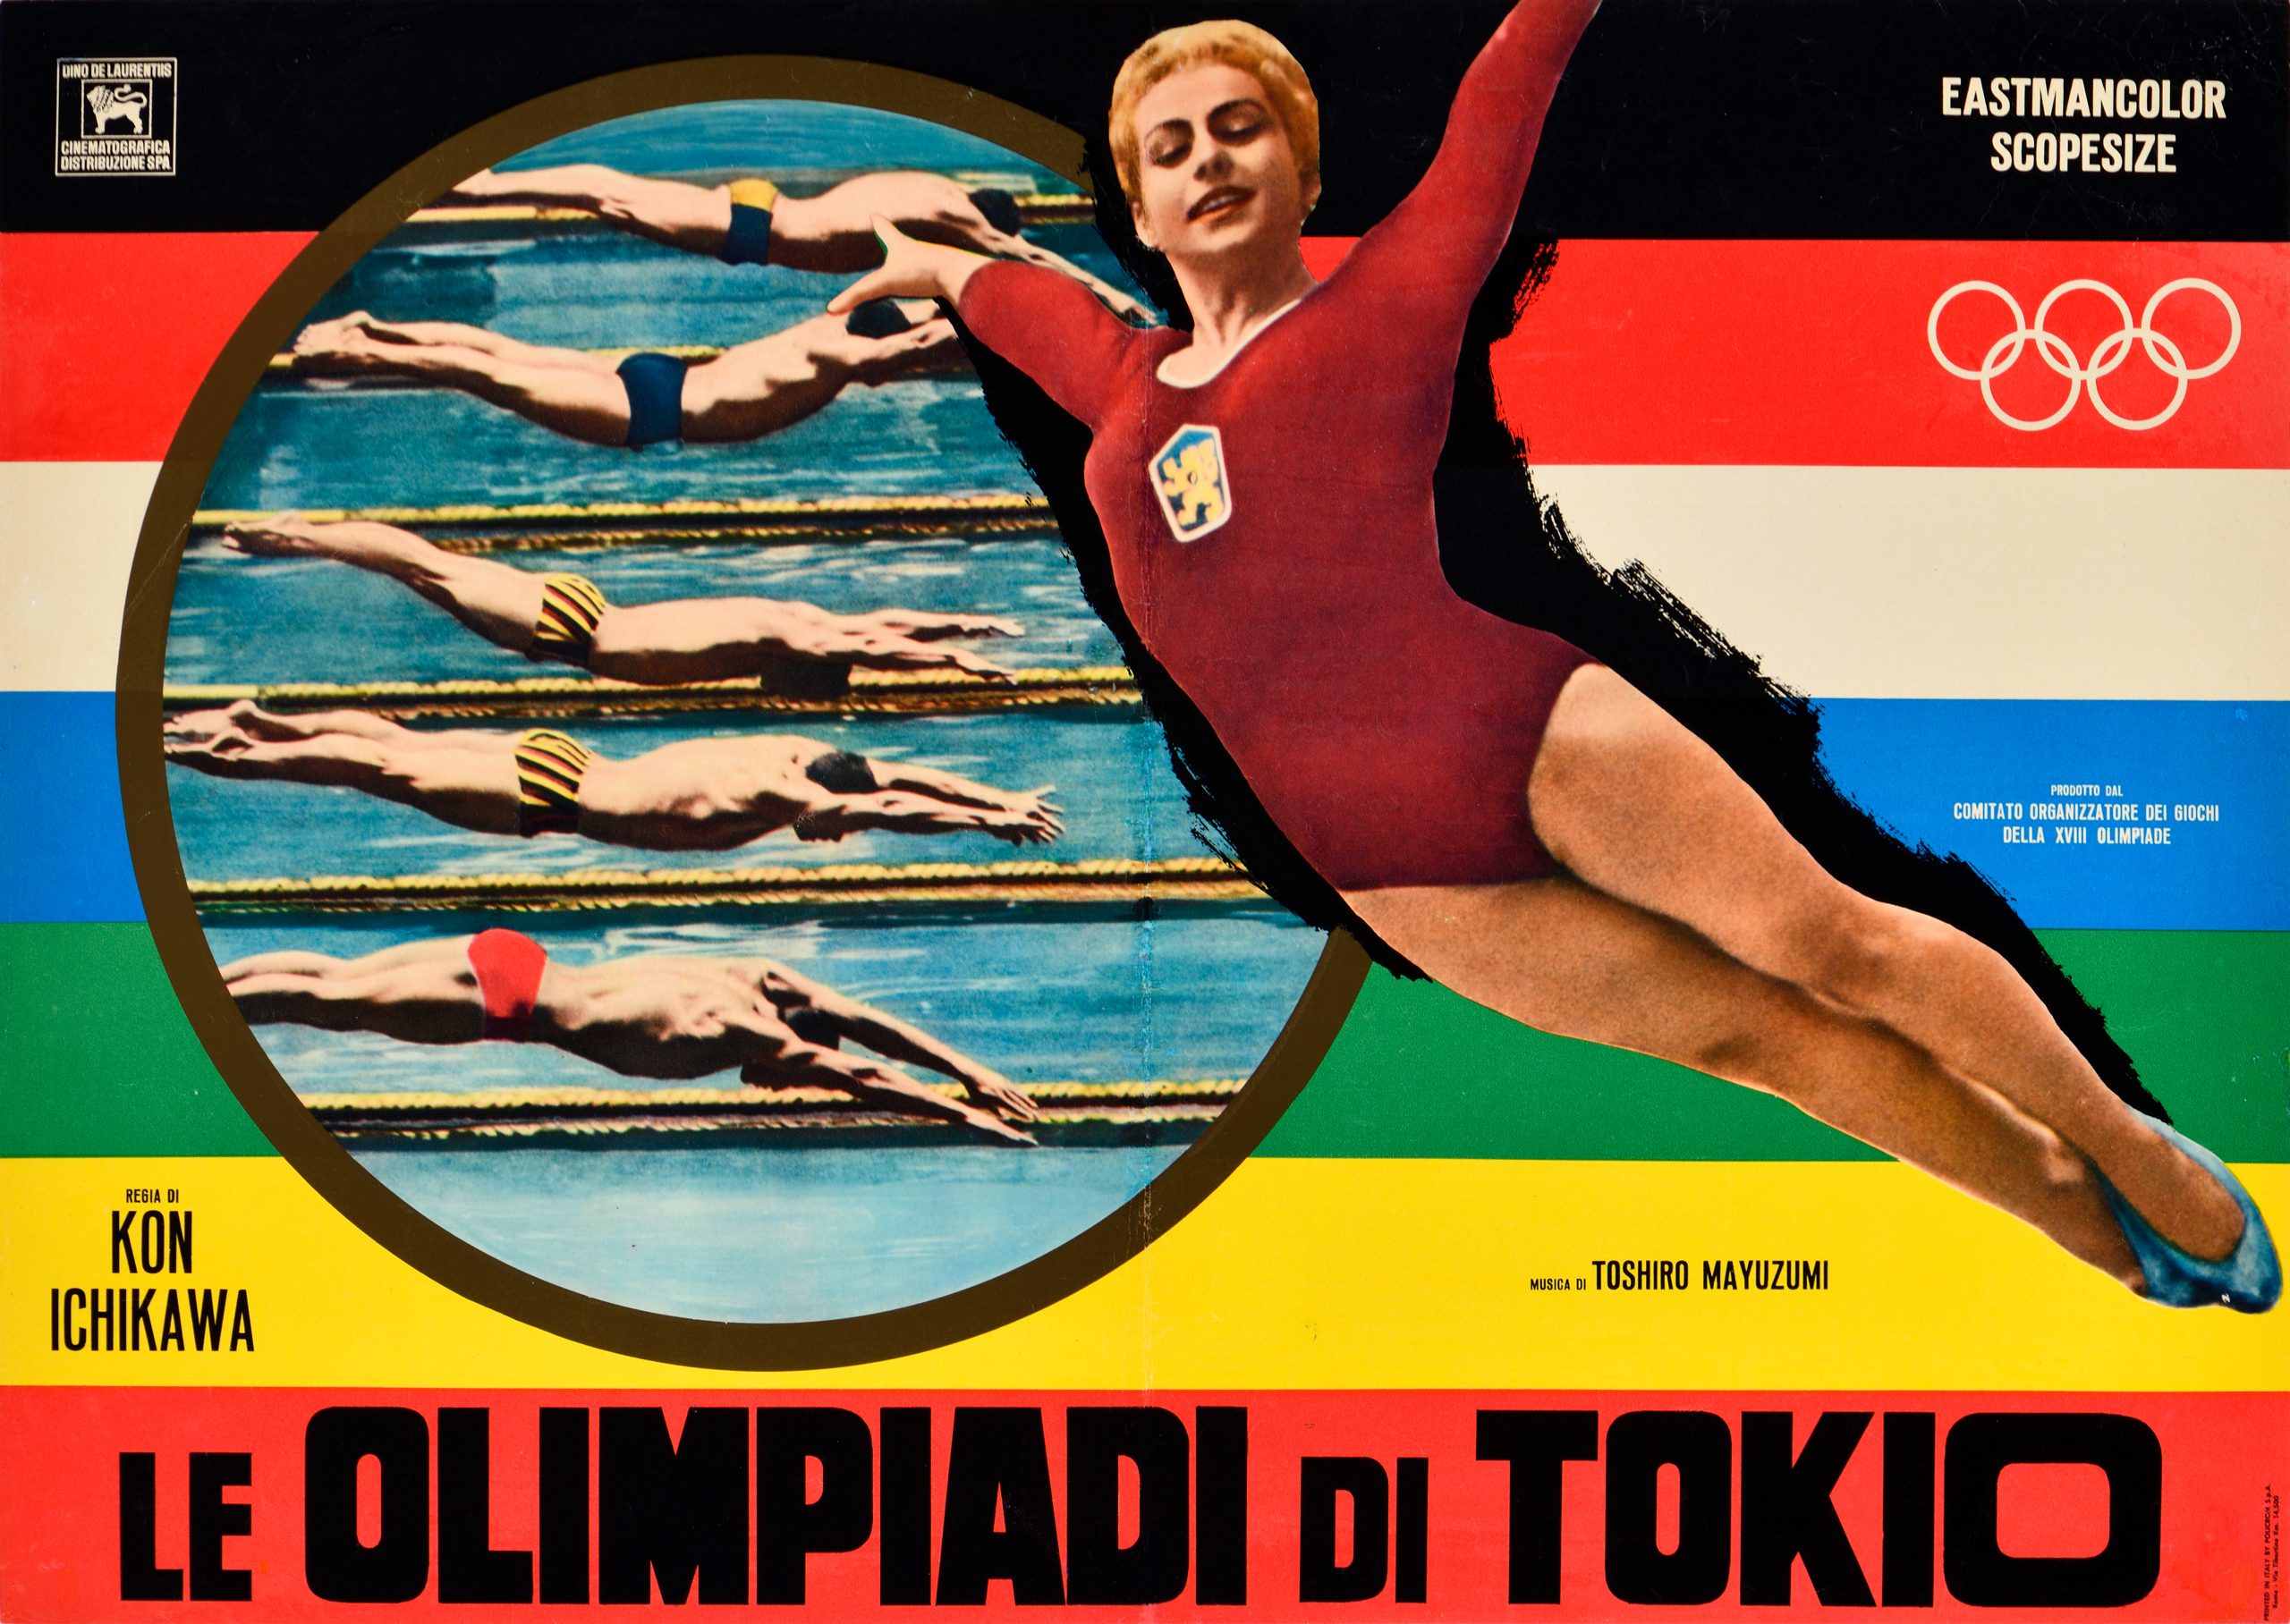 A poster featuring a woman diving upward on top of a photo with male competitive swimmers diving into pool lanes.